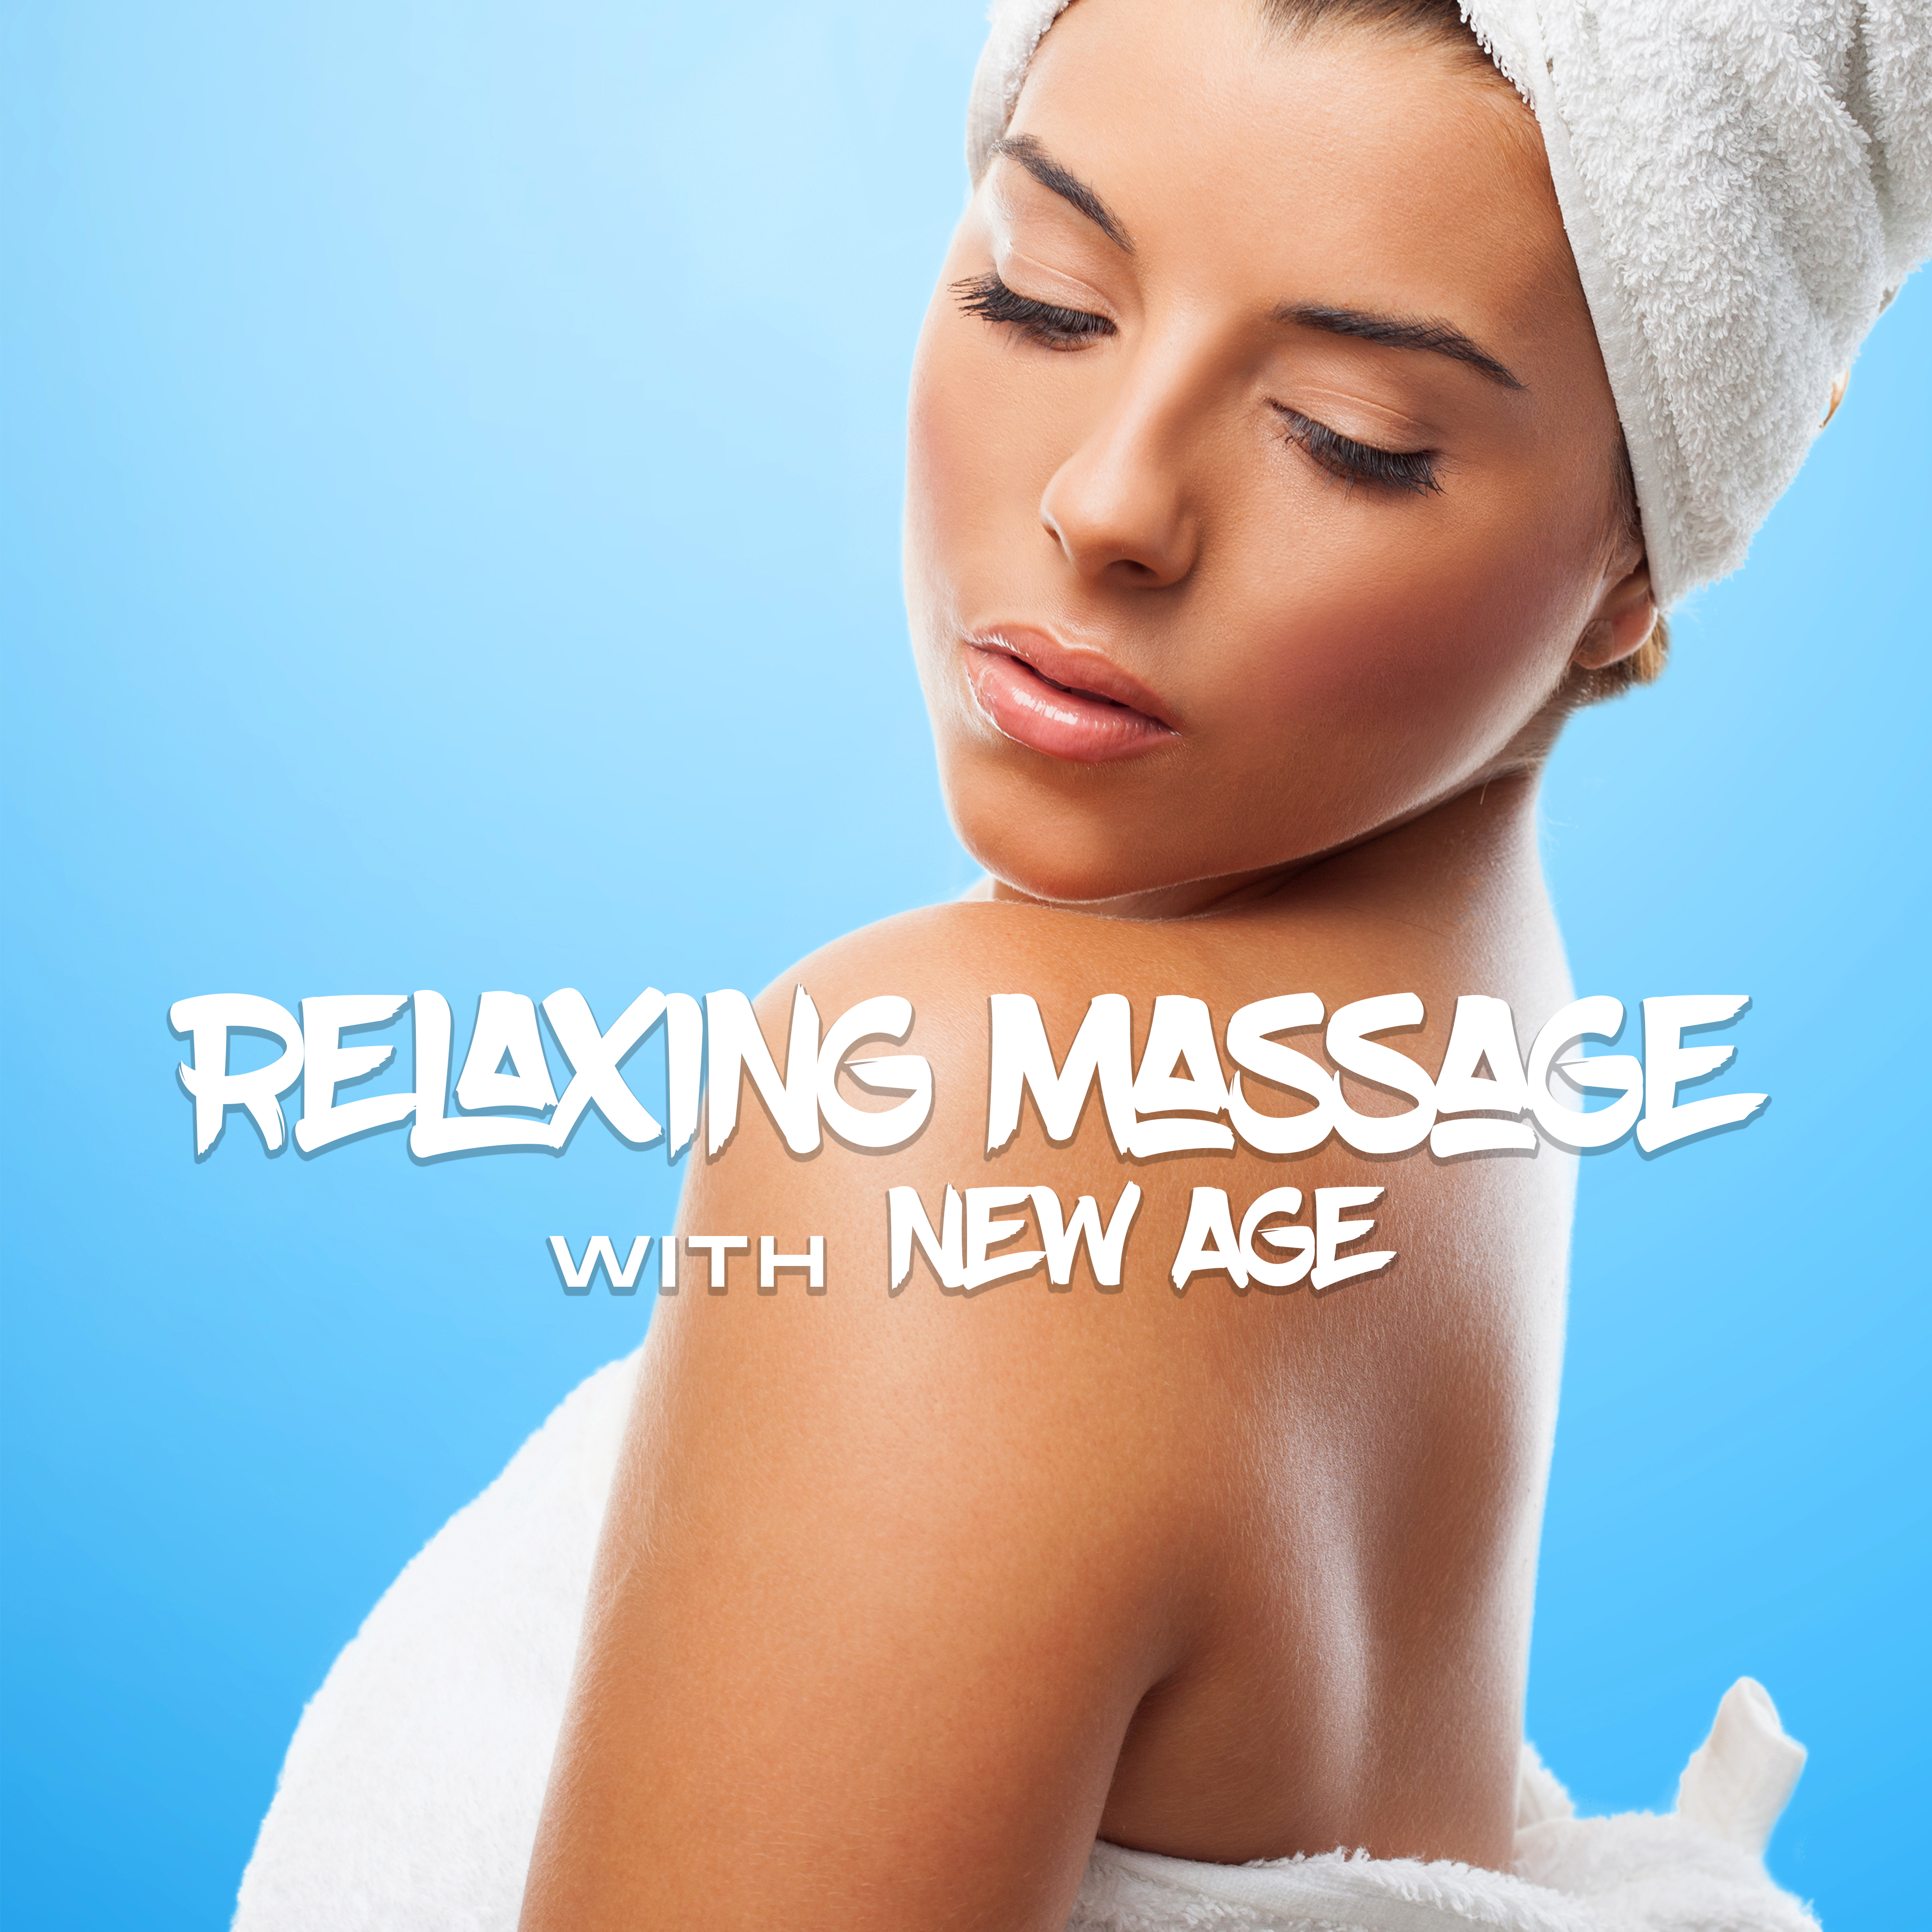 Relaxing Massage with New Age